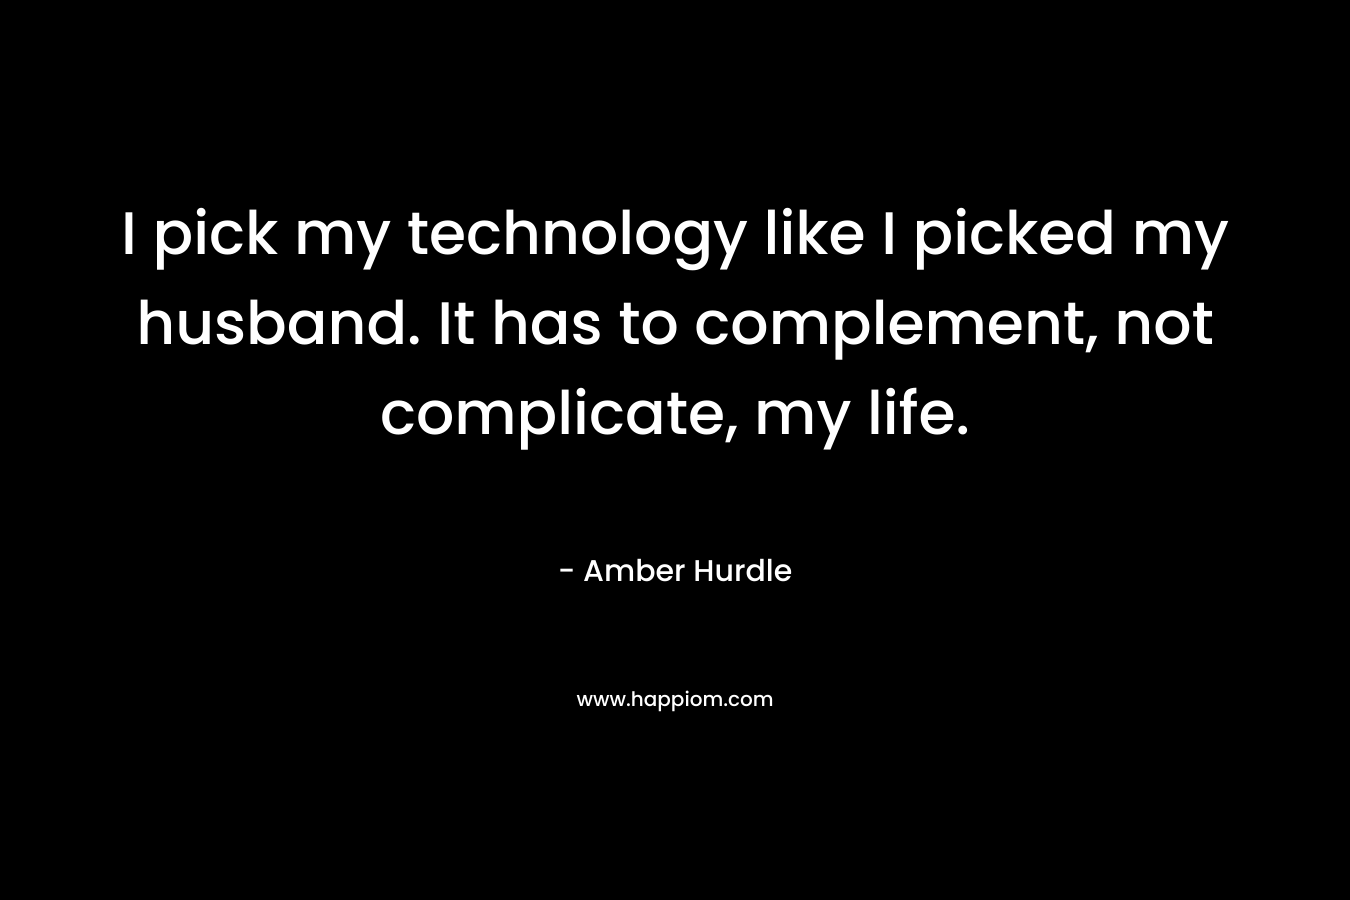 I pick my technology like I picked my husband. It has to complement, not complicate, my life.